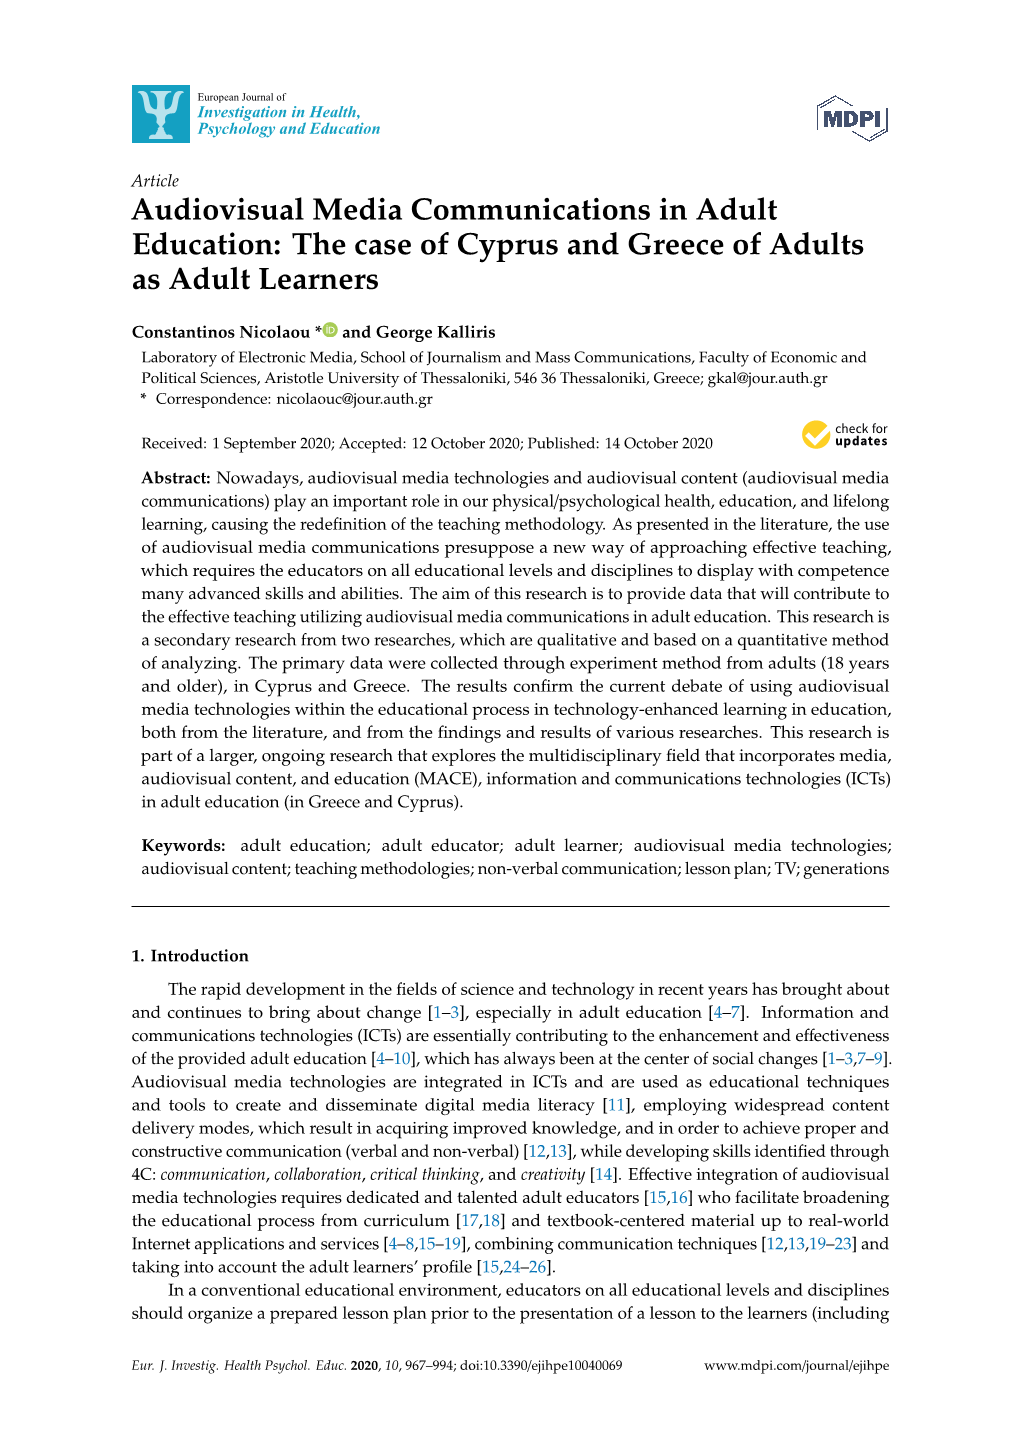 Audiovisual Media Communications in Adult Education: the Case of Cyprus and Greece of Adults As Adult Learners